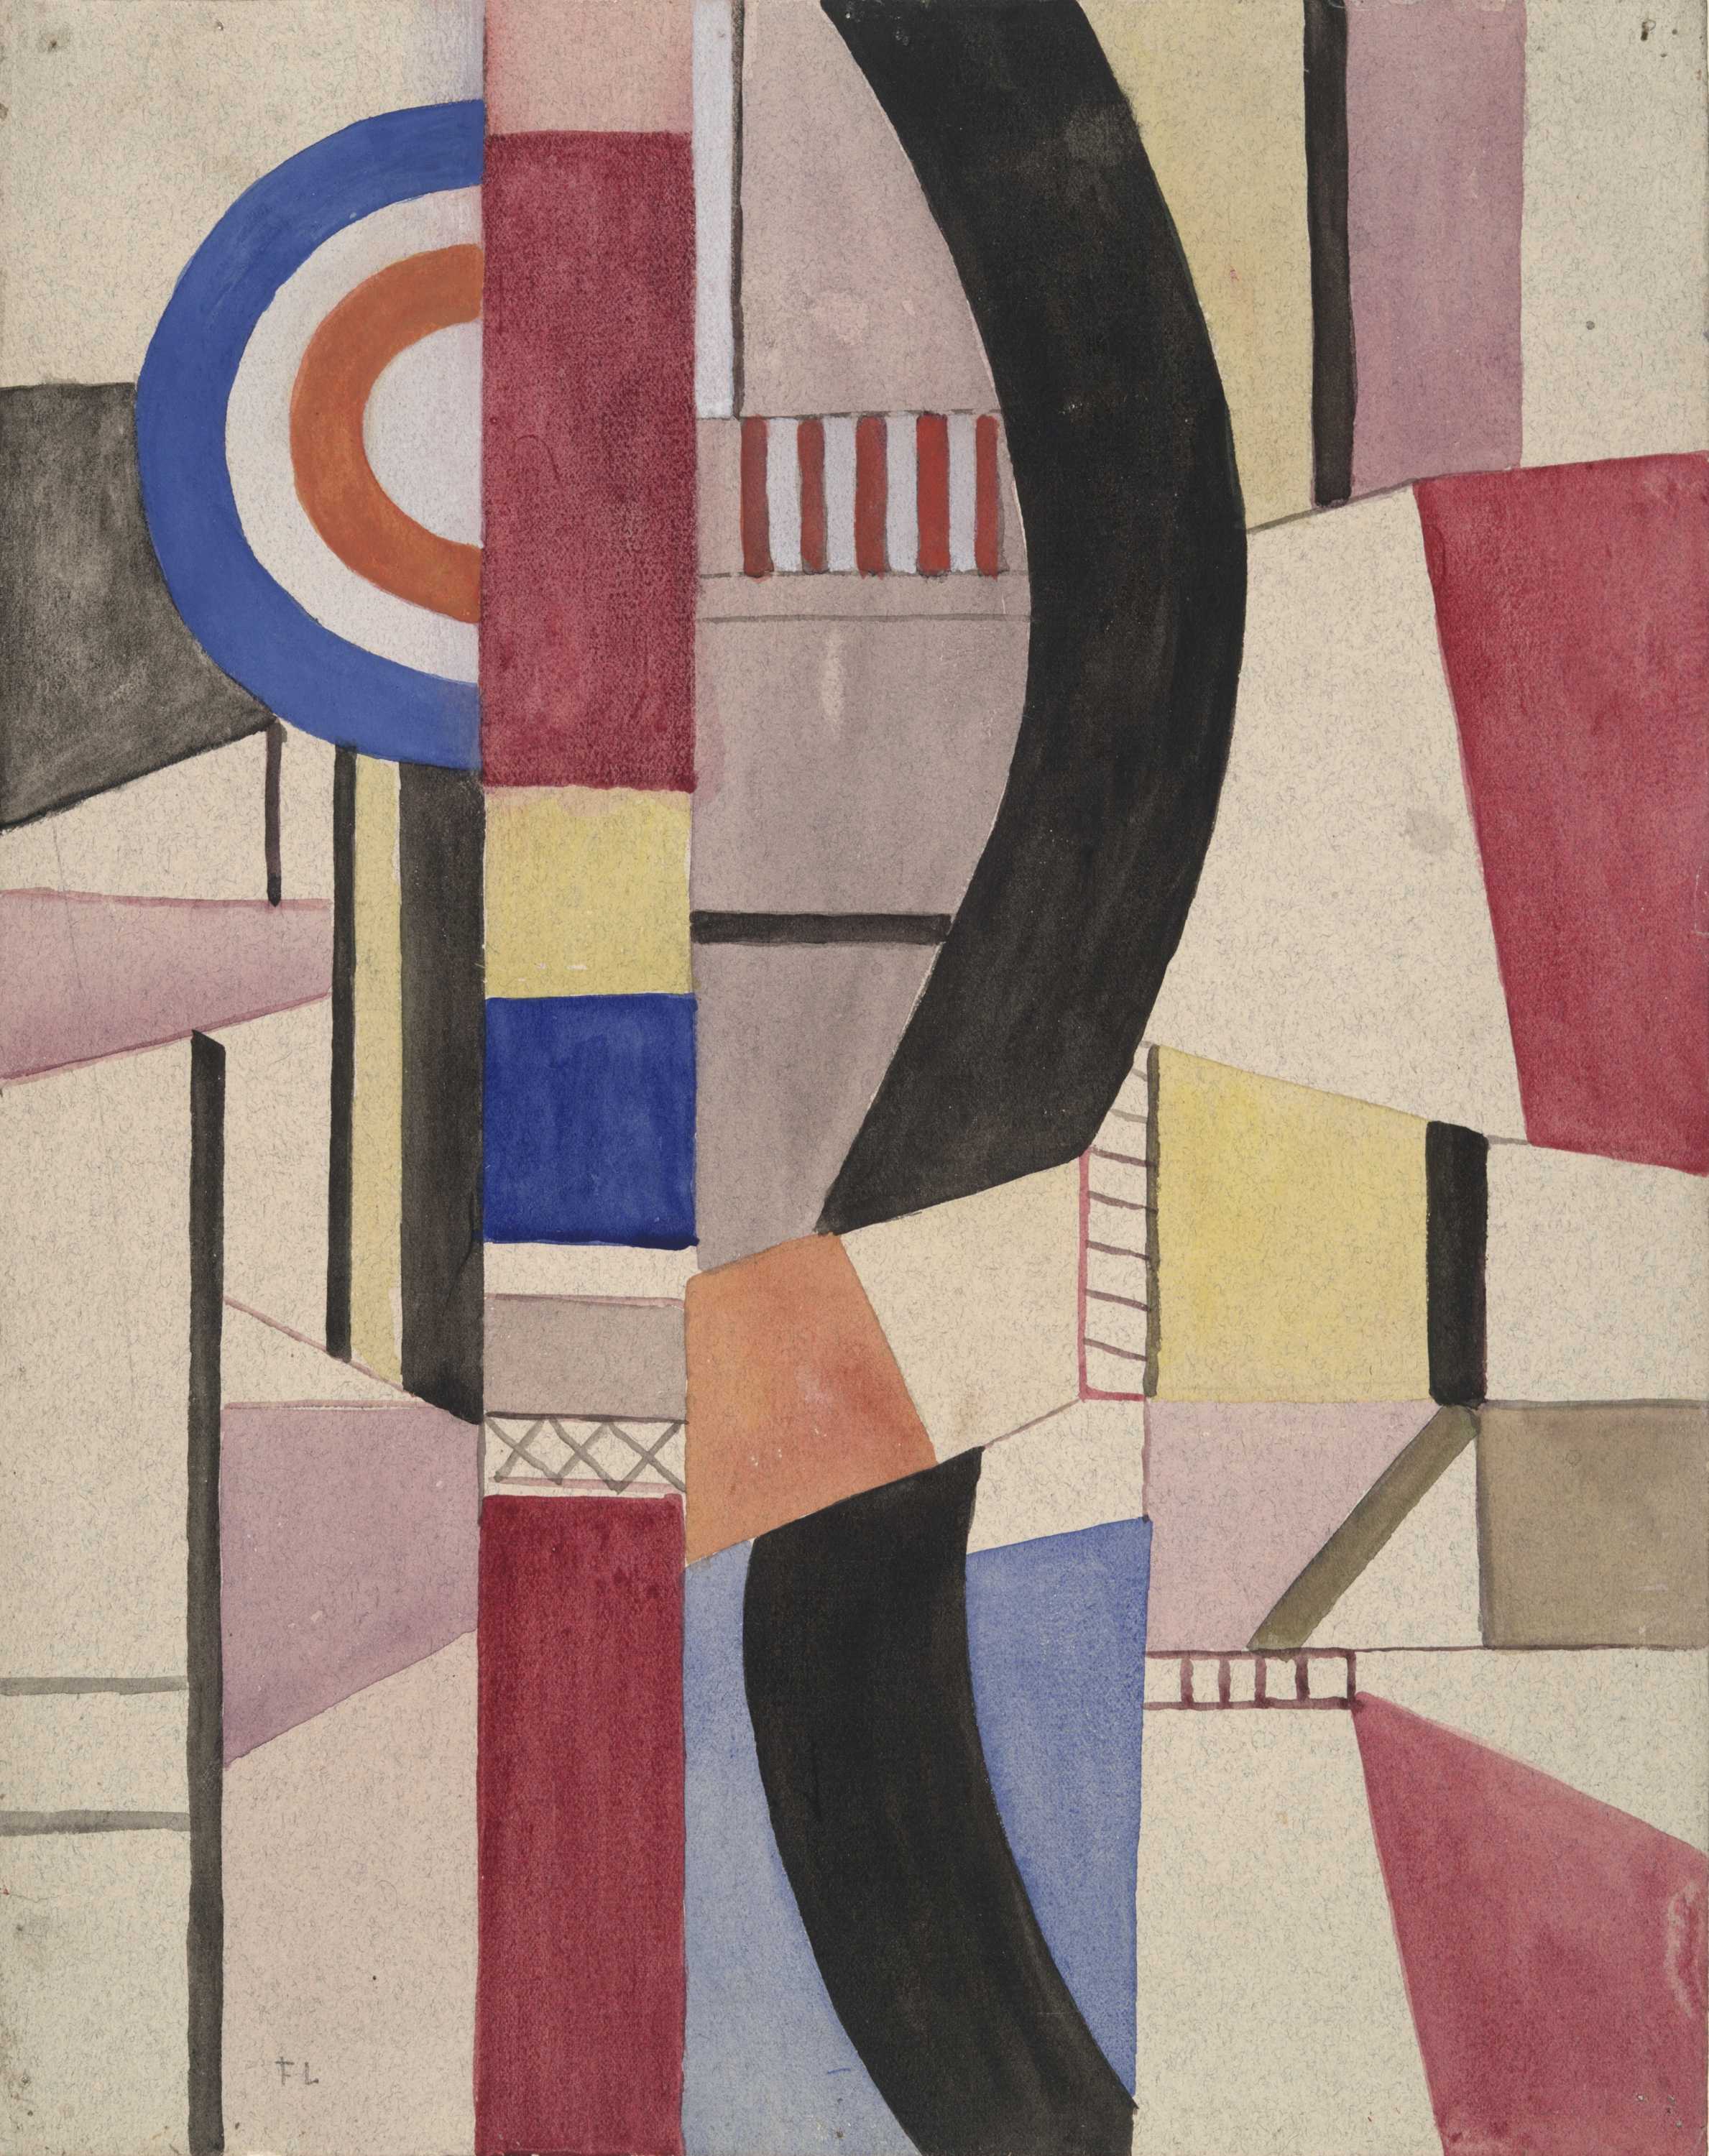 Find out more about Fernand Léger - Study for Le Disque